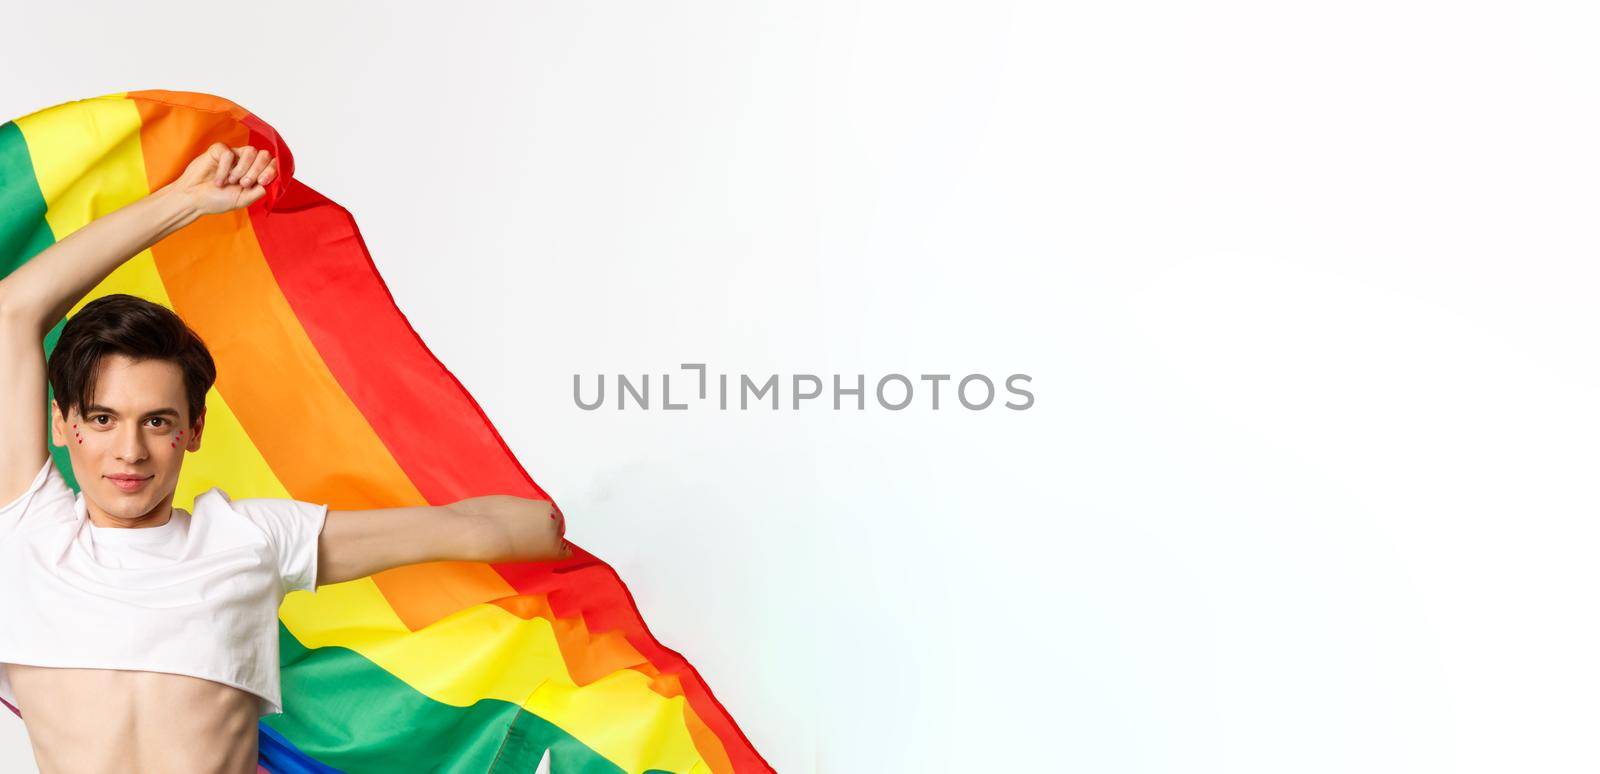 Vertical view of happy queer person in crop top and jeans waving raised rainbow flag, celebrating lgbtq holiday, standing over white background by Benzoix